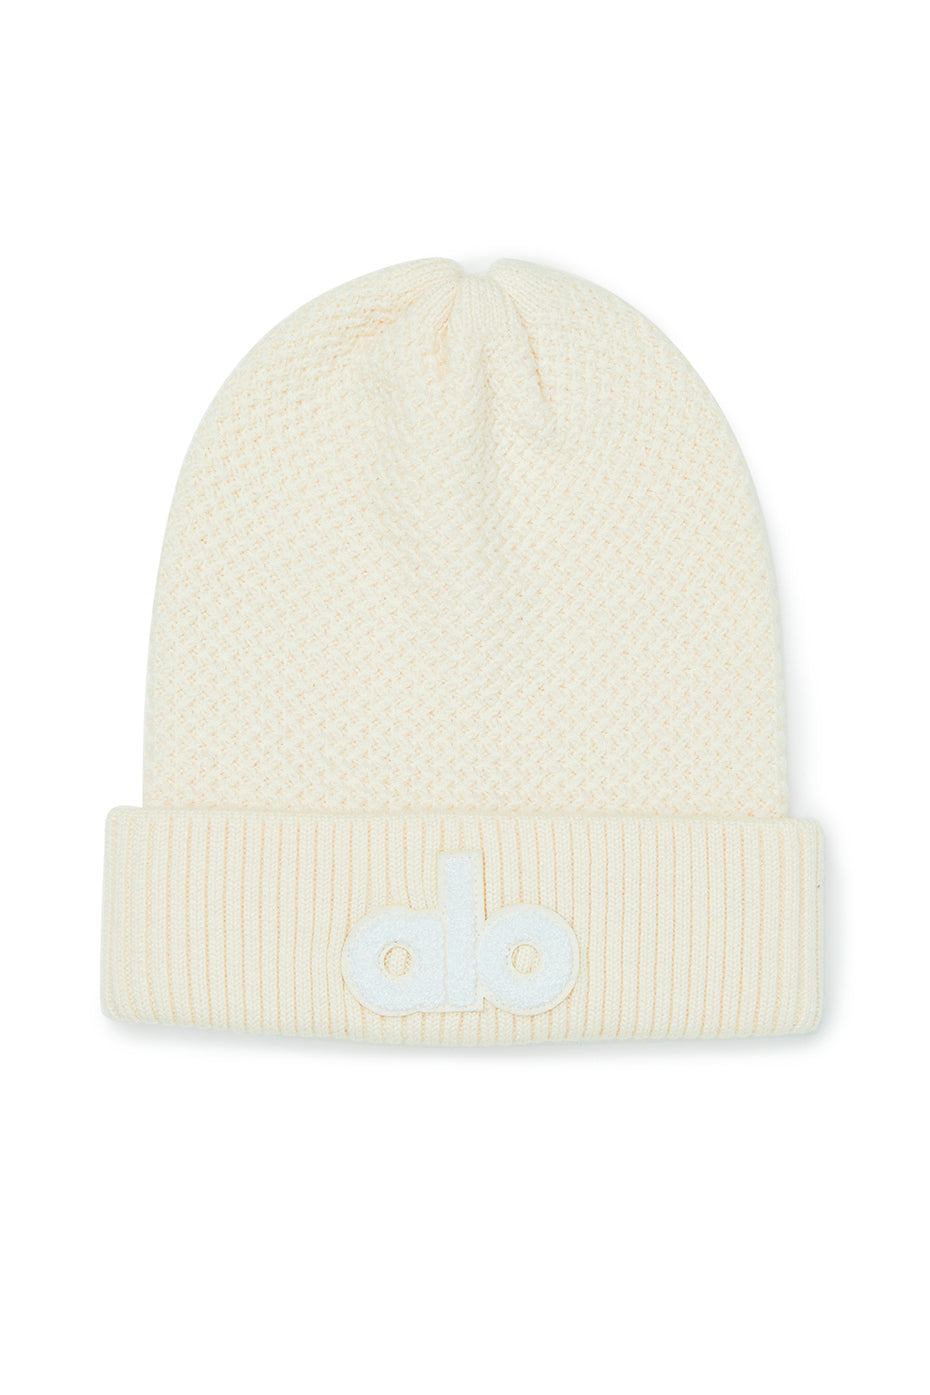 Cool Skies Beanie Hat in Ivory by Alo Yoga | Ballet for Women